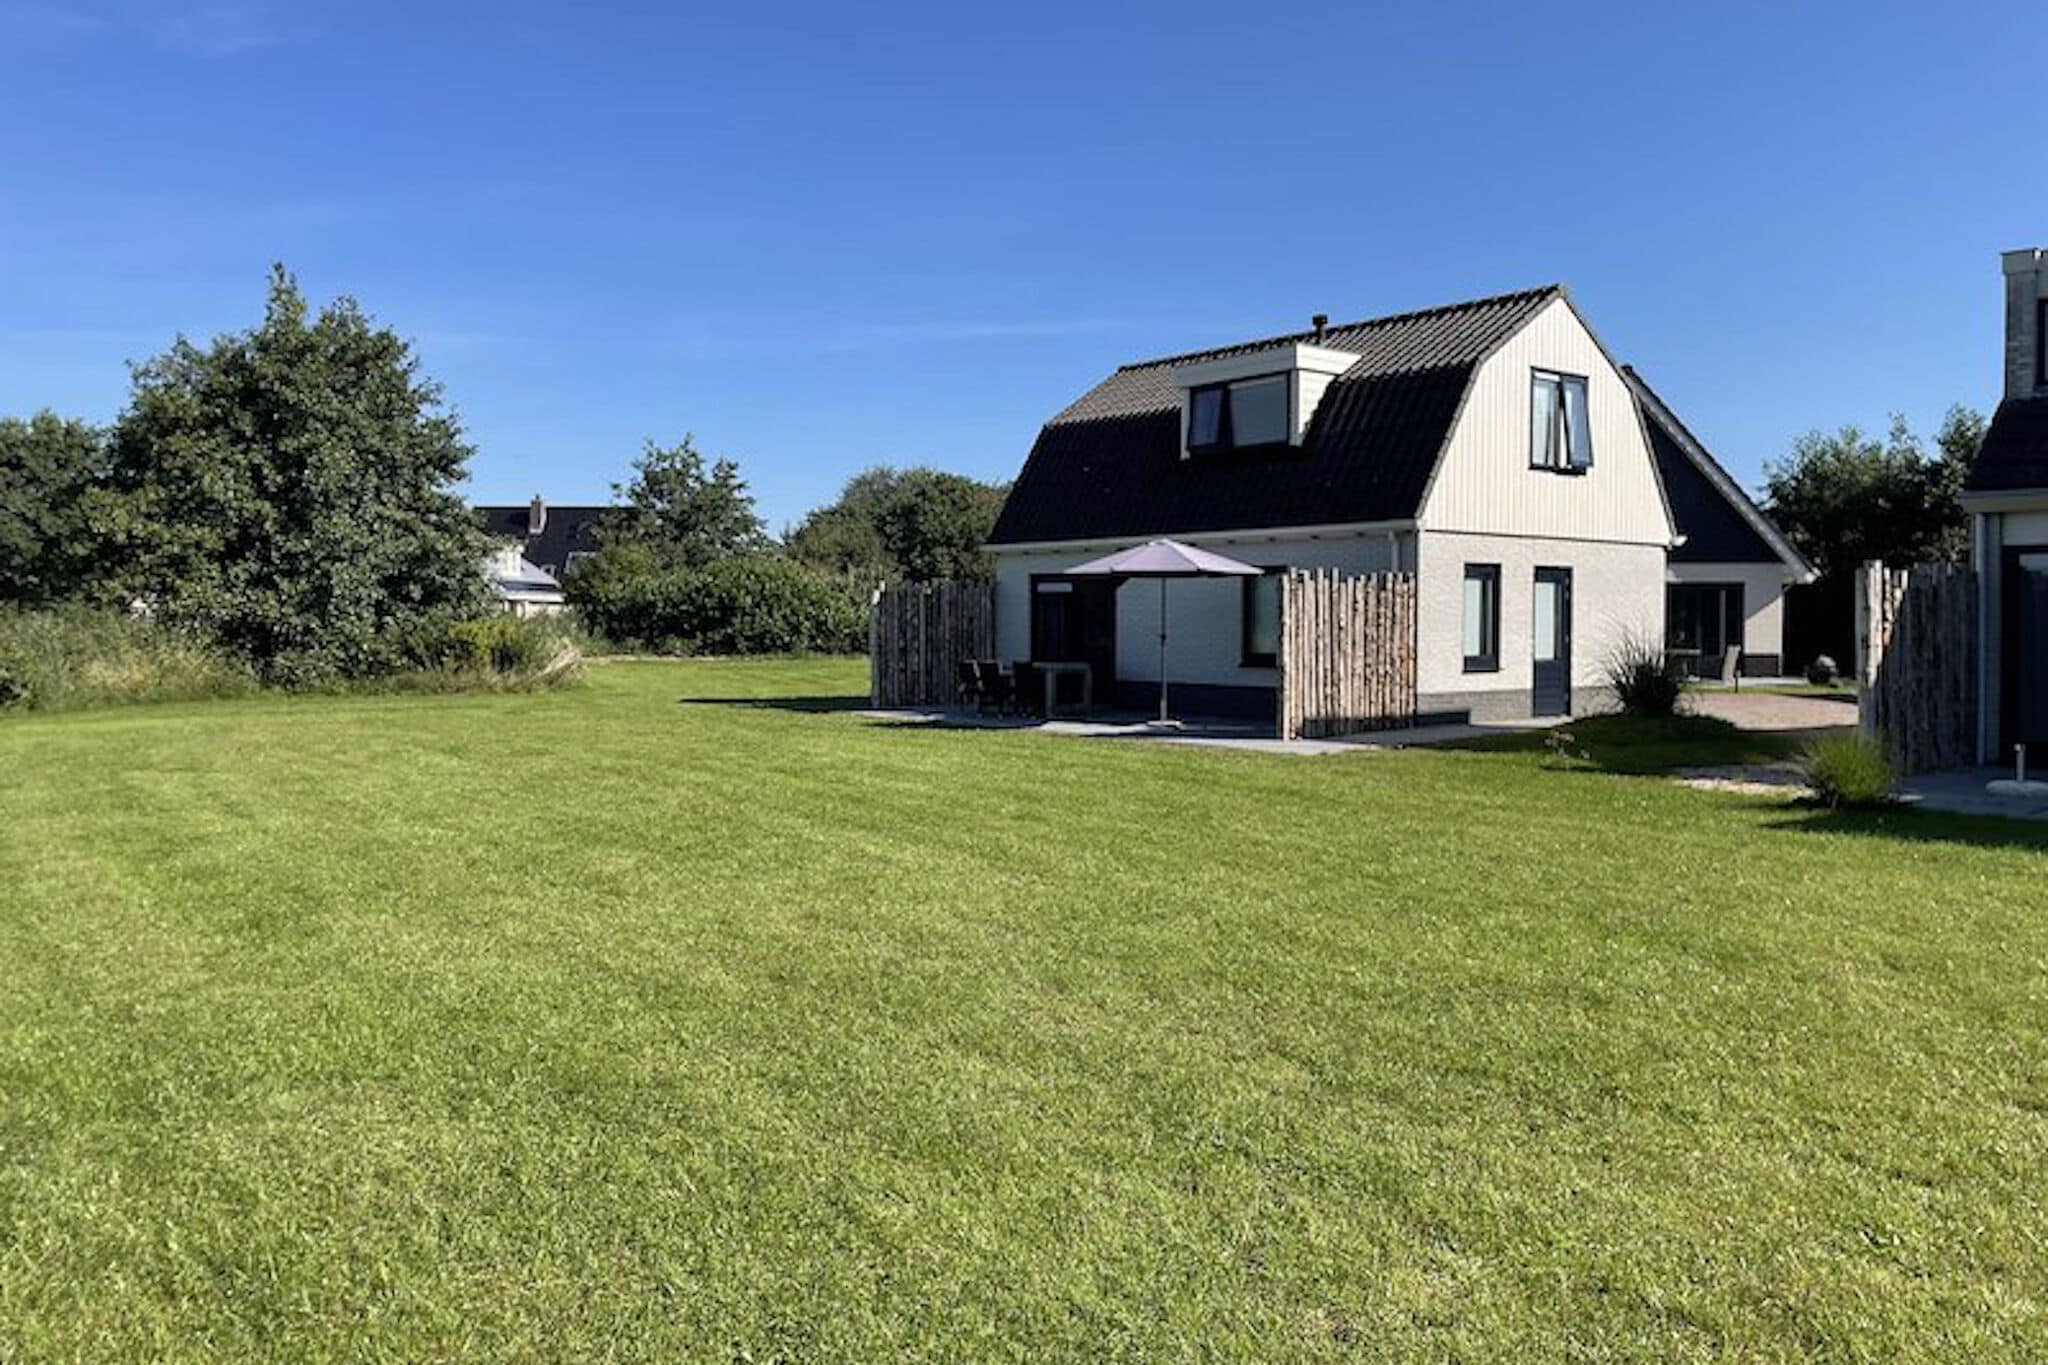 Detached house with nice view located on Texel